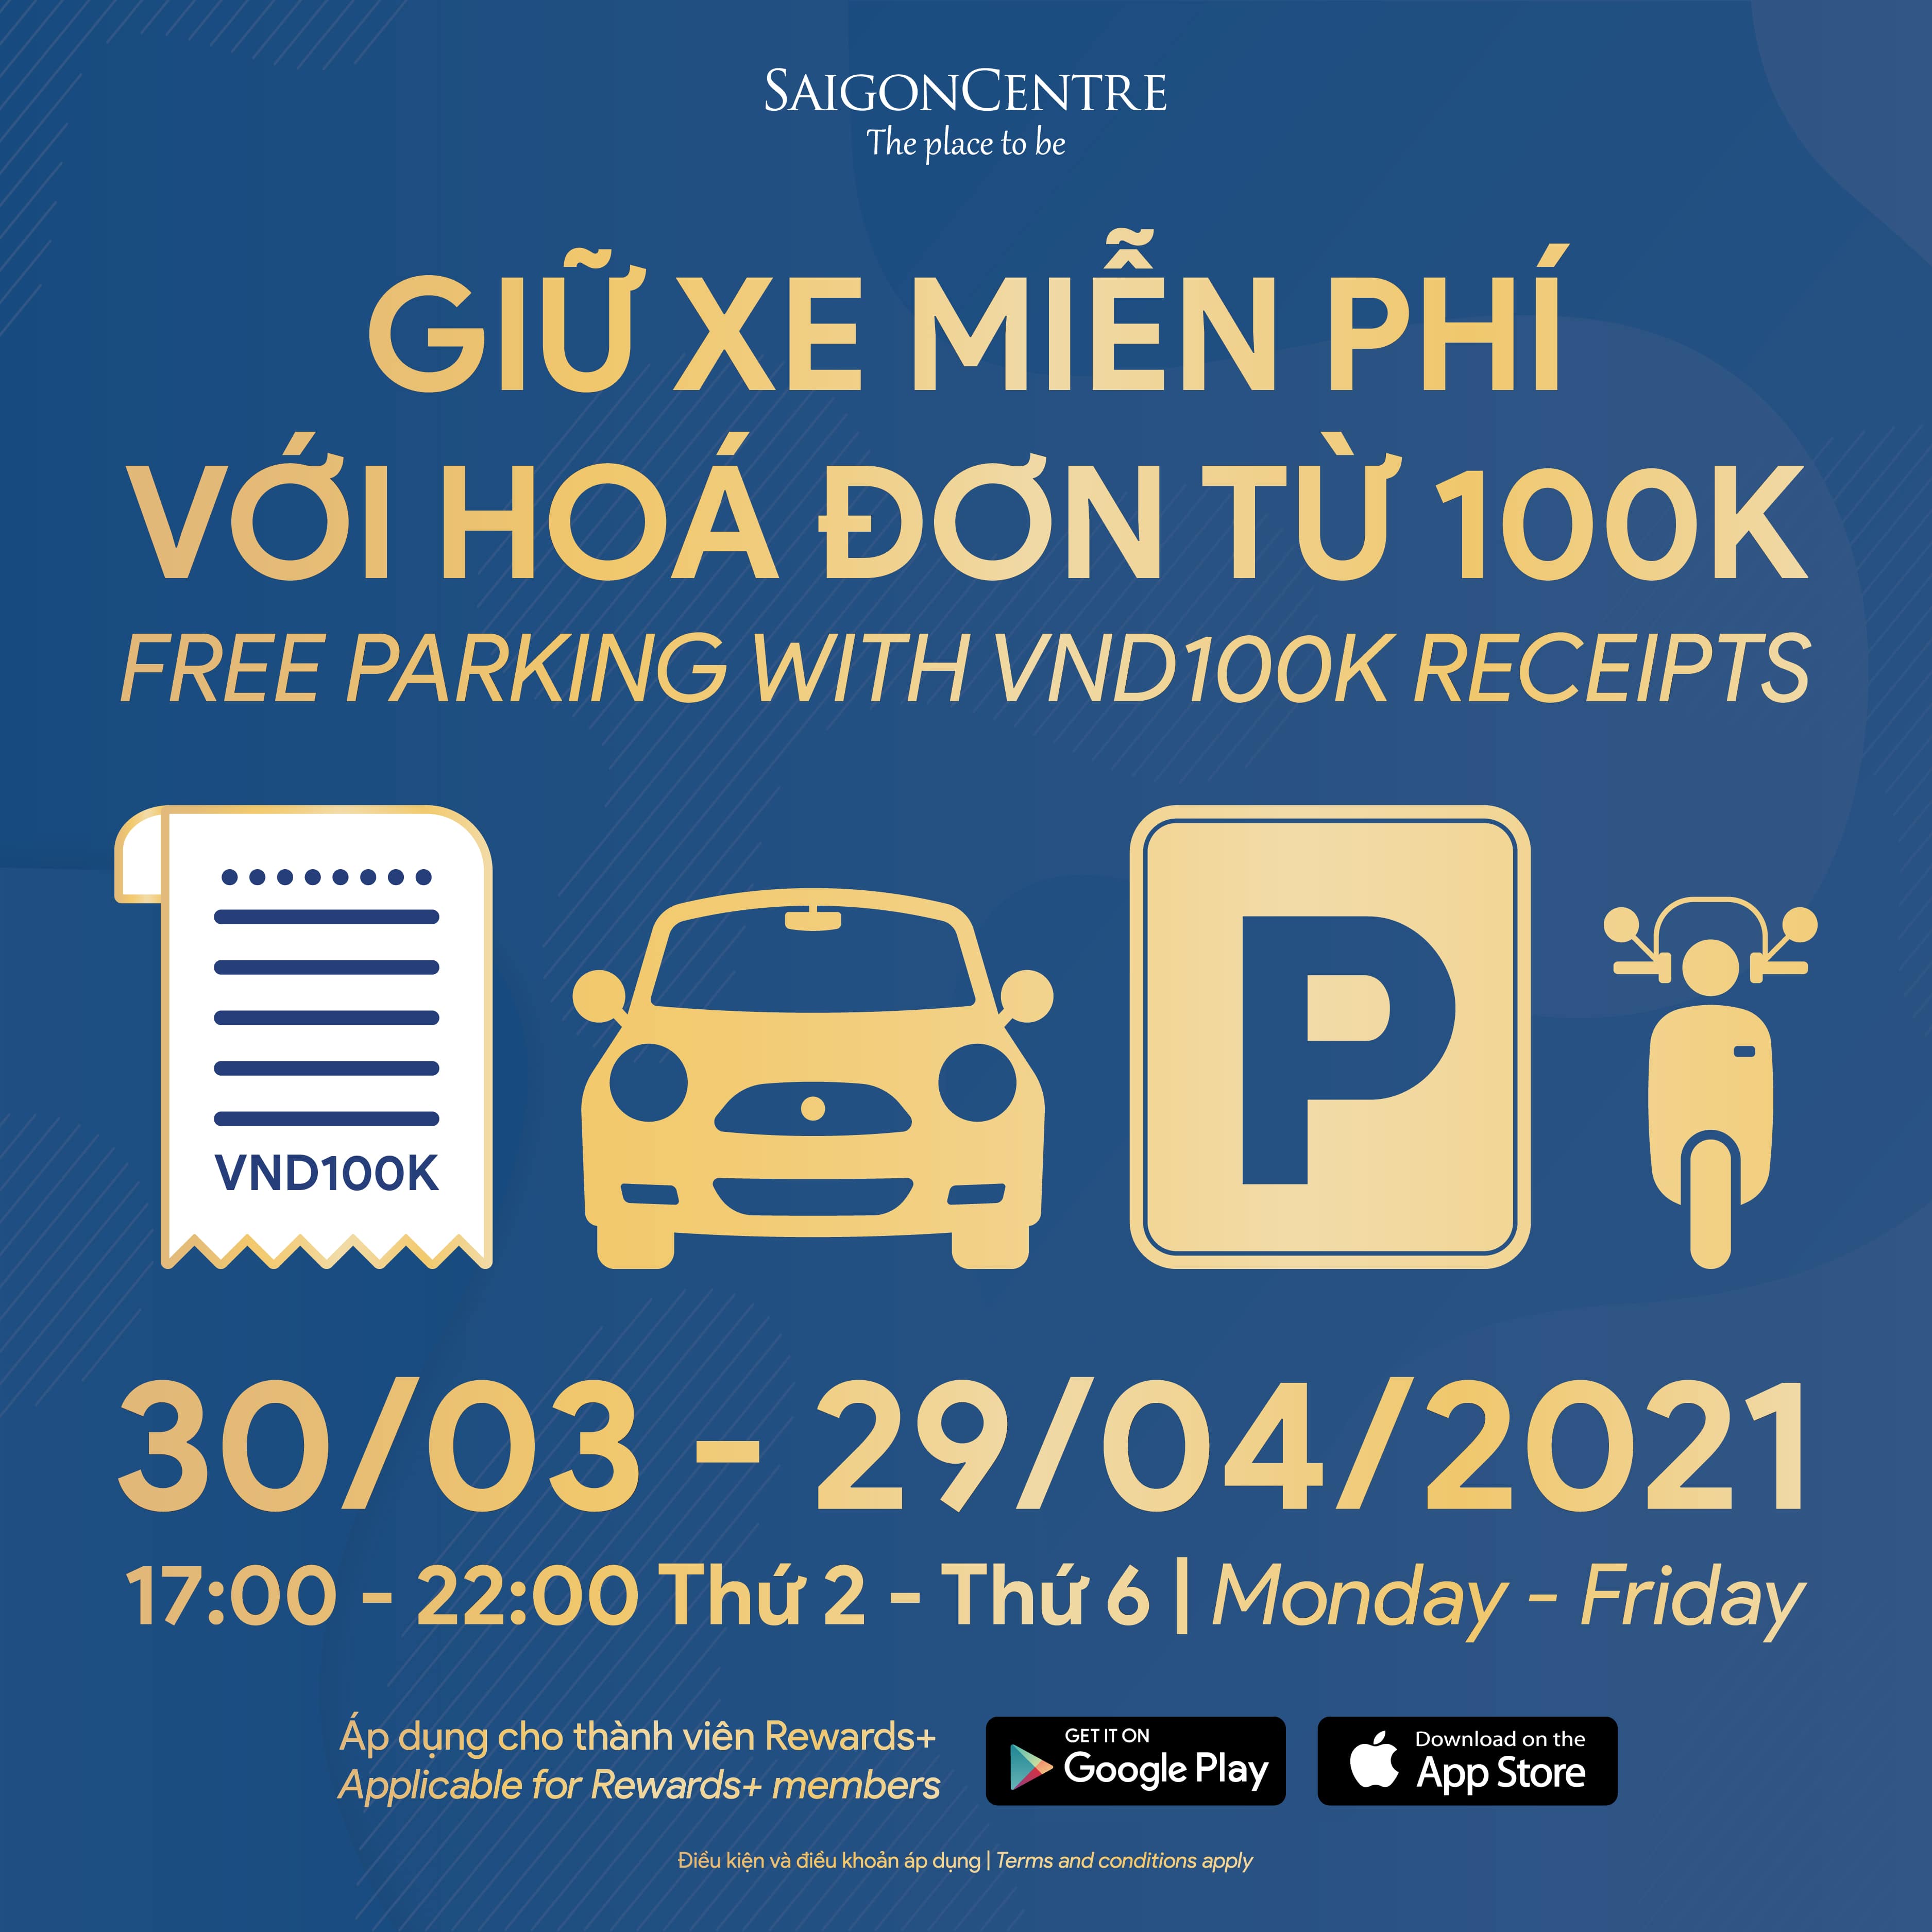 FREE PARKING WITH VND100,000 RECEIPTS